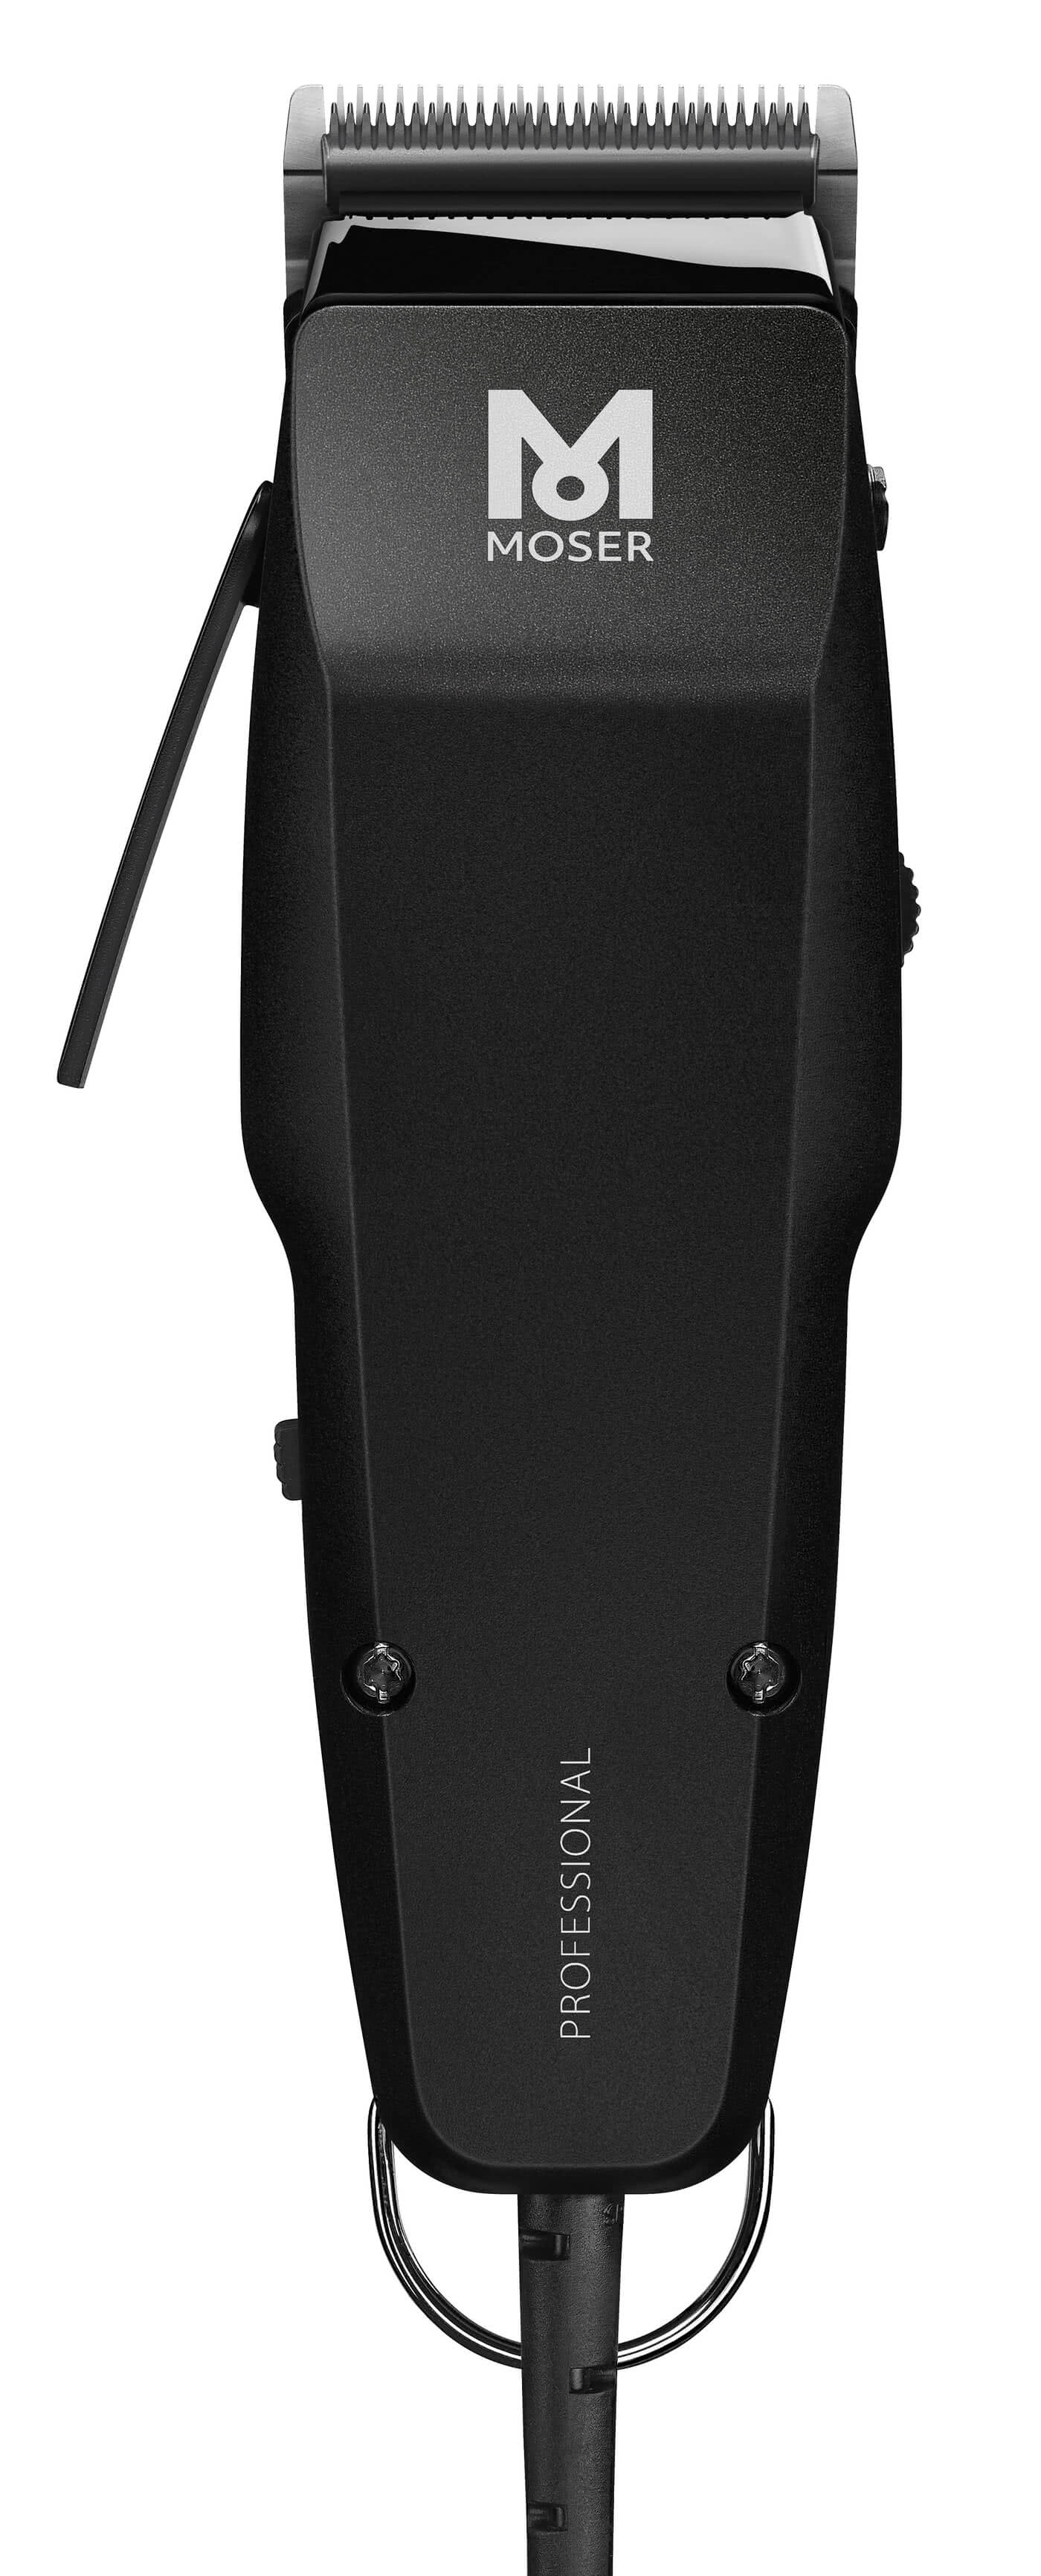 The MOSER 1400 CORDLESS clipper for professional-grade cuts. قم